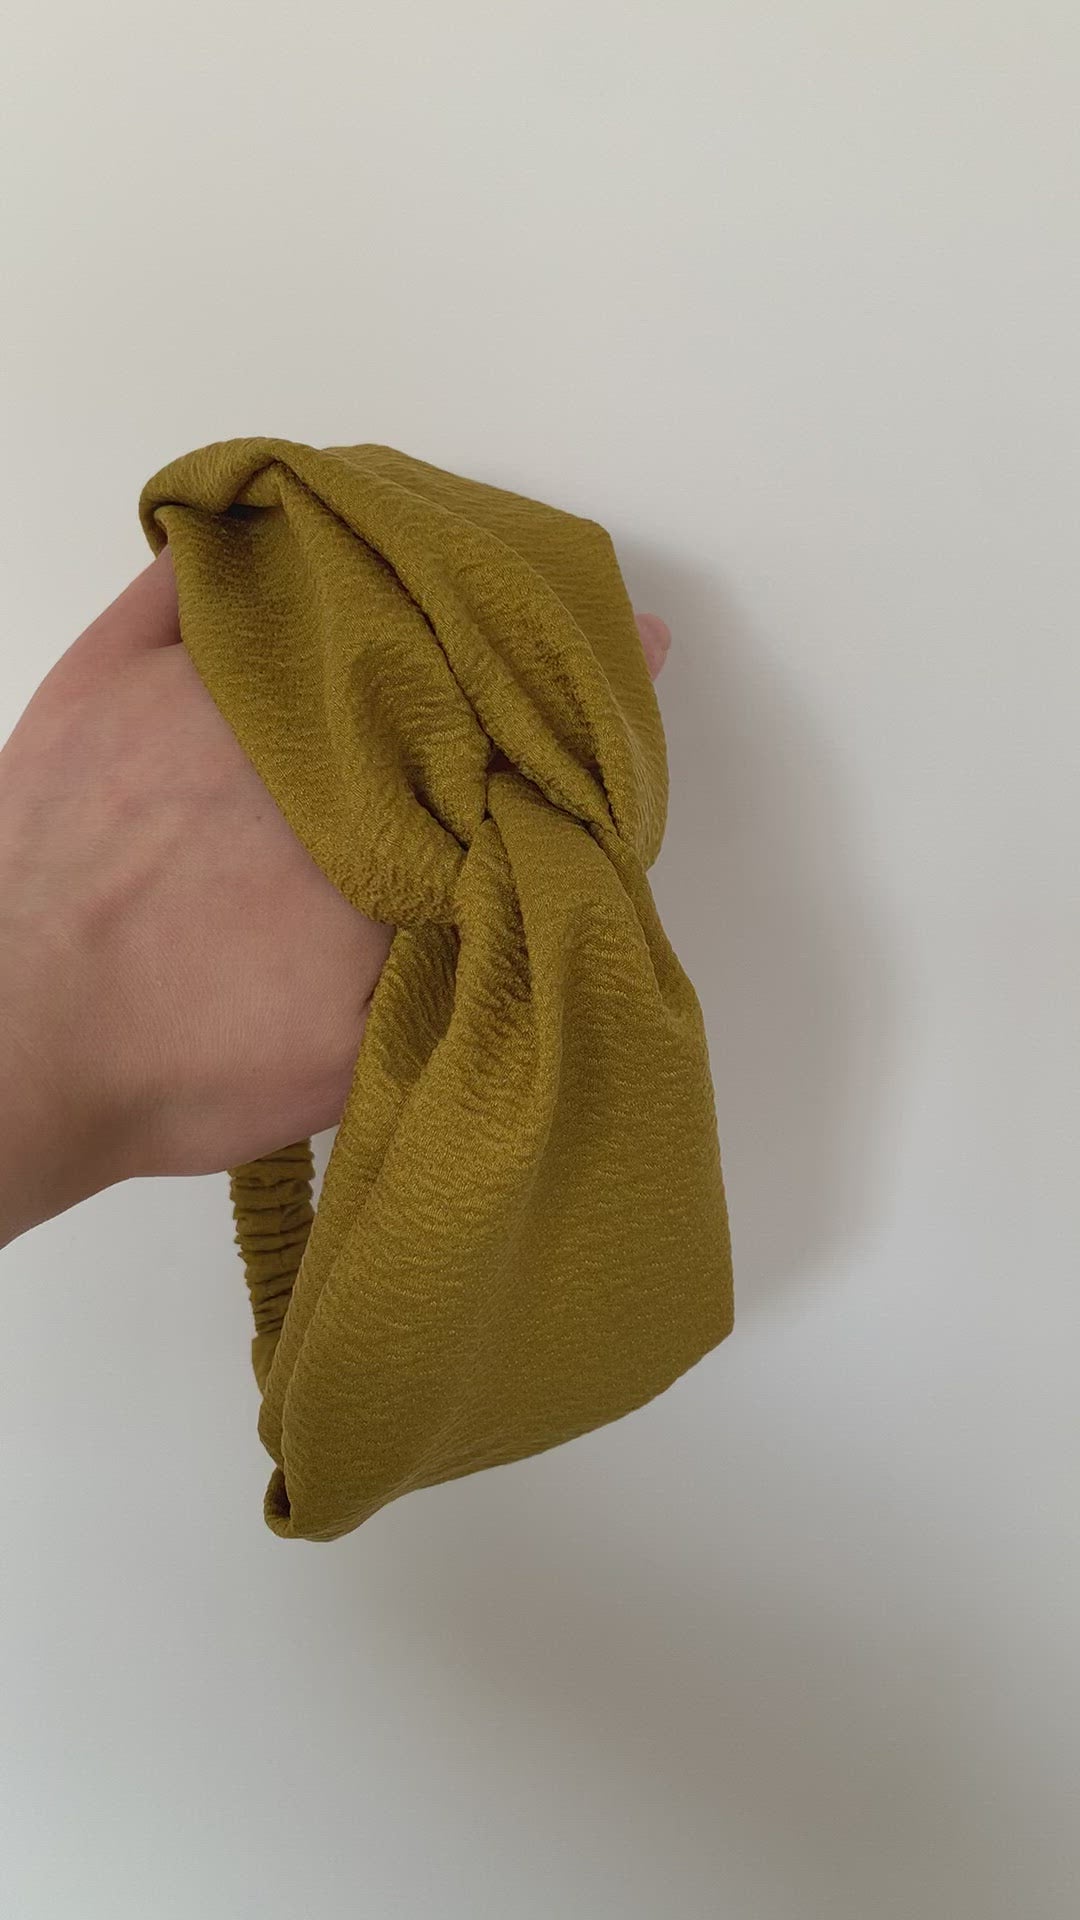 Video of a model's hand holding a twisted headband in Chartreuse.